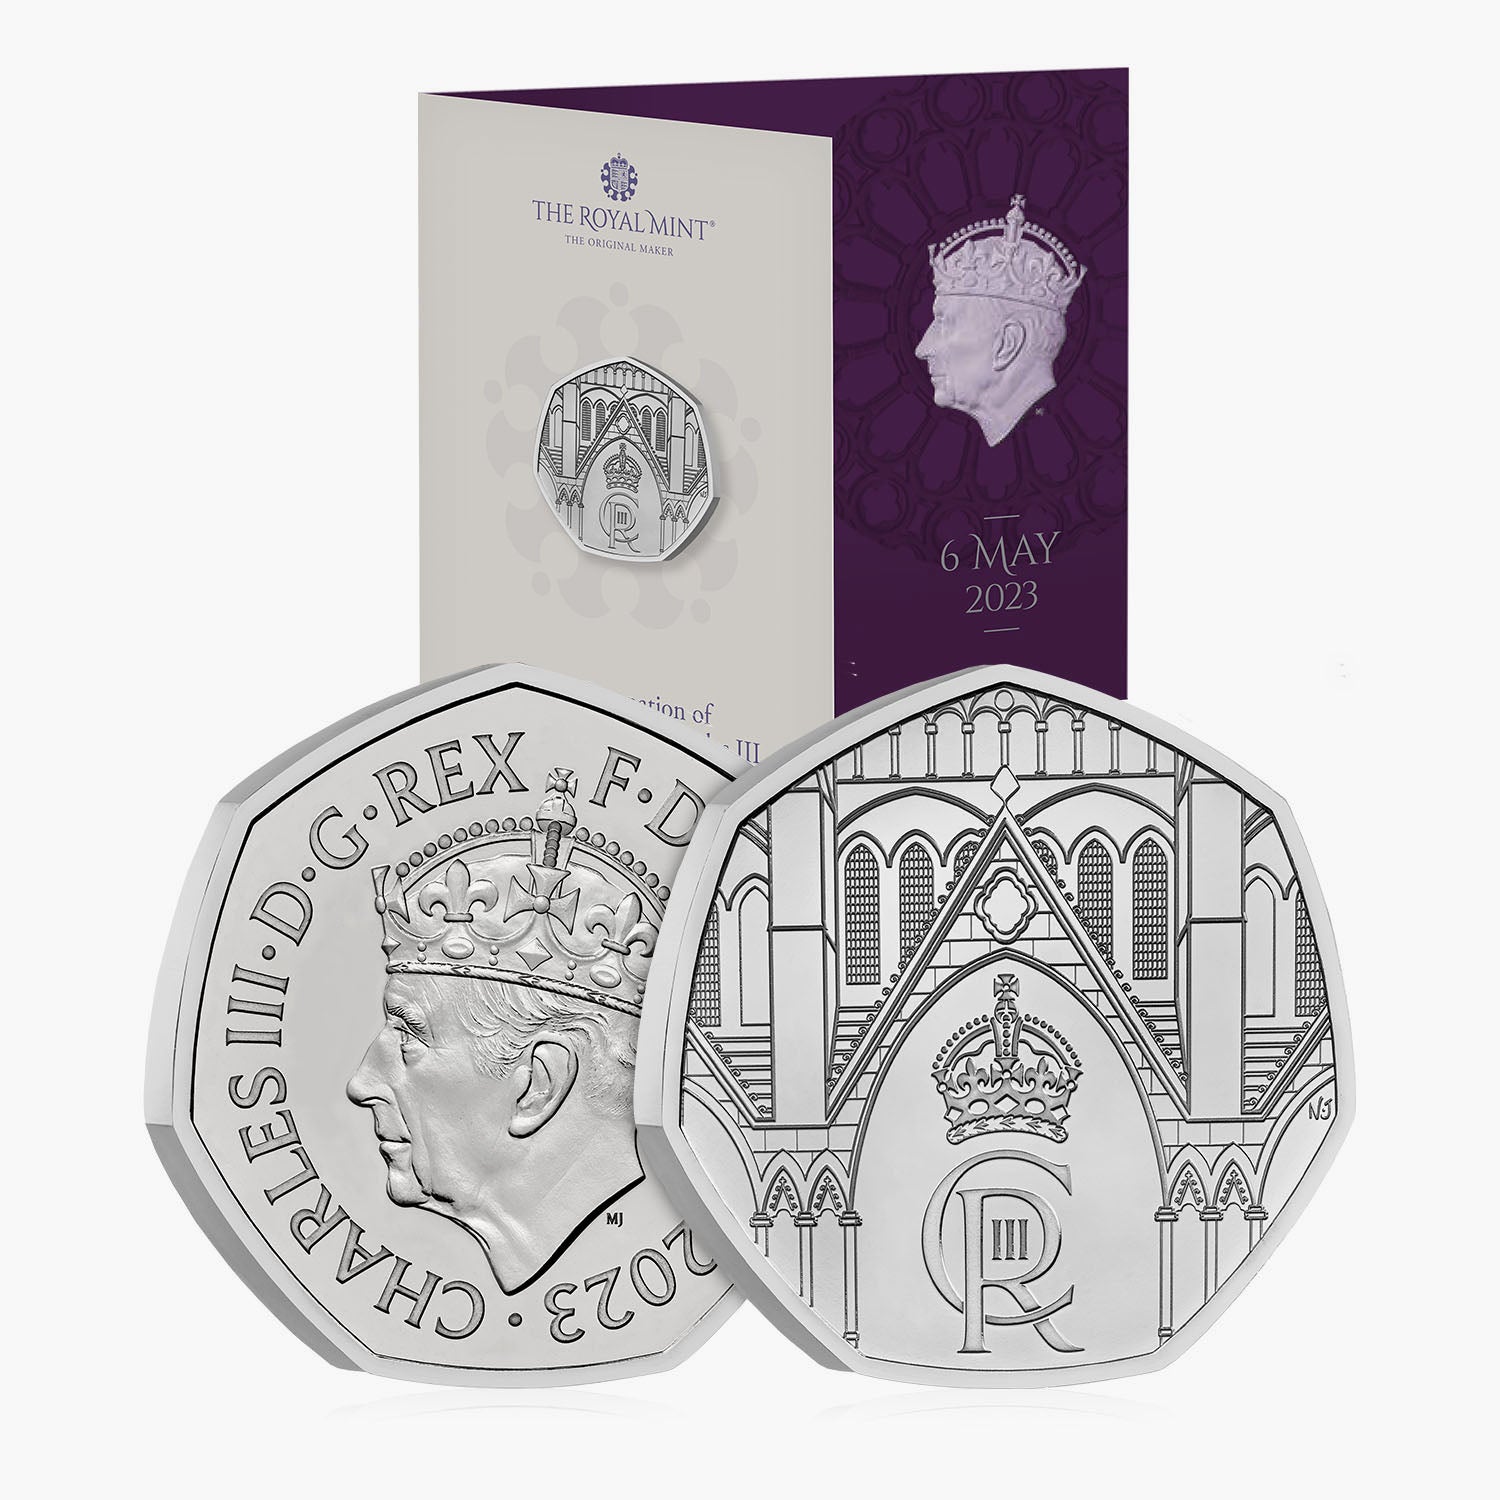 The Coronation of His Majesty King Charles III UK 50p Brilliant Uncirculated Coin